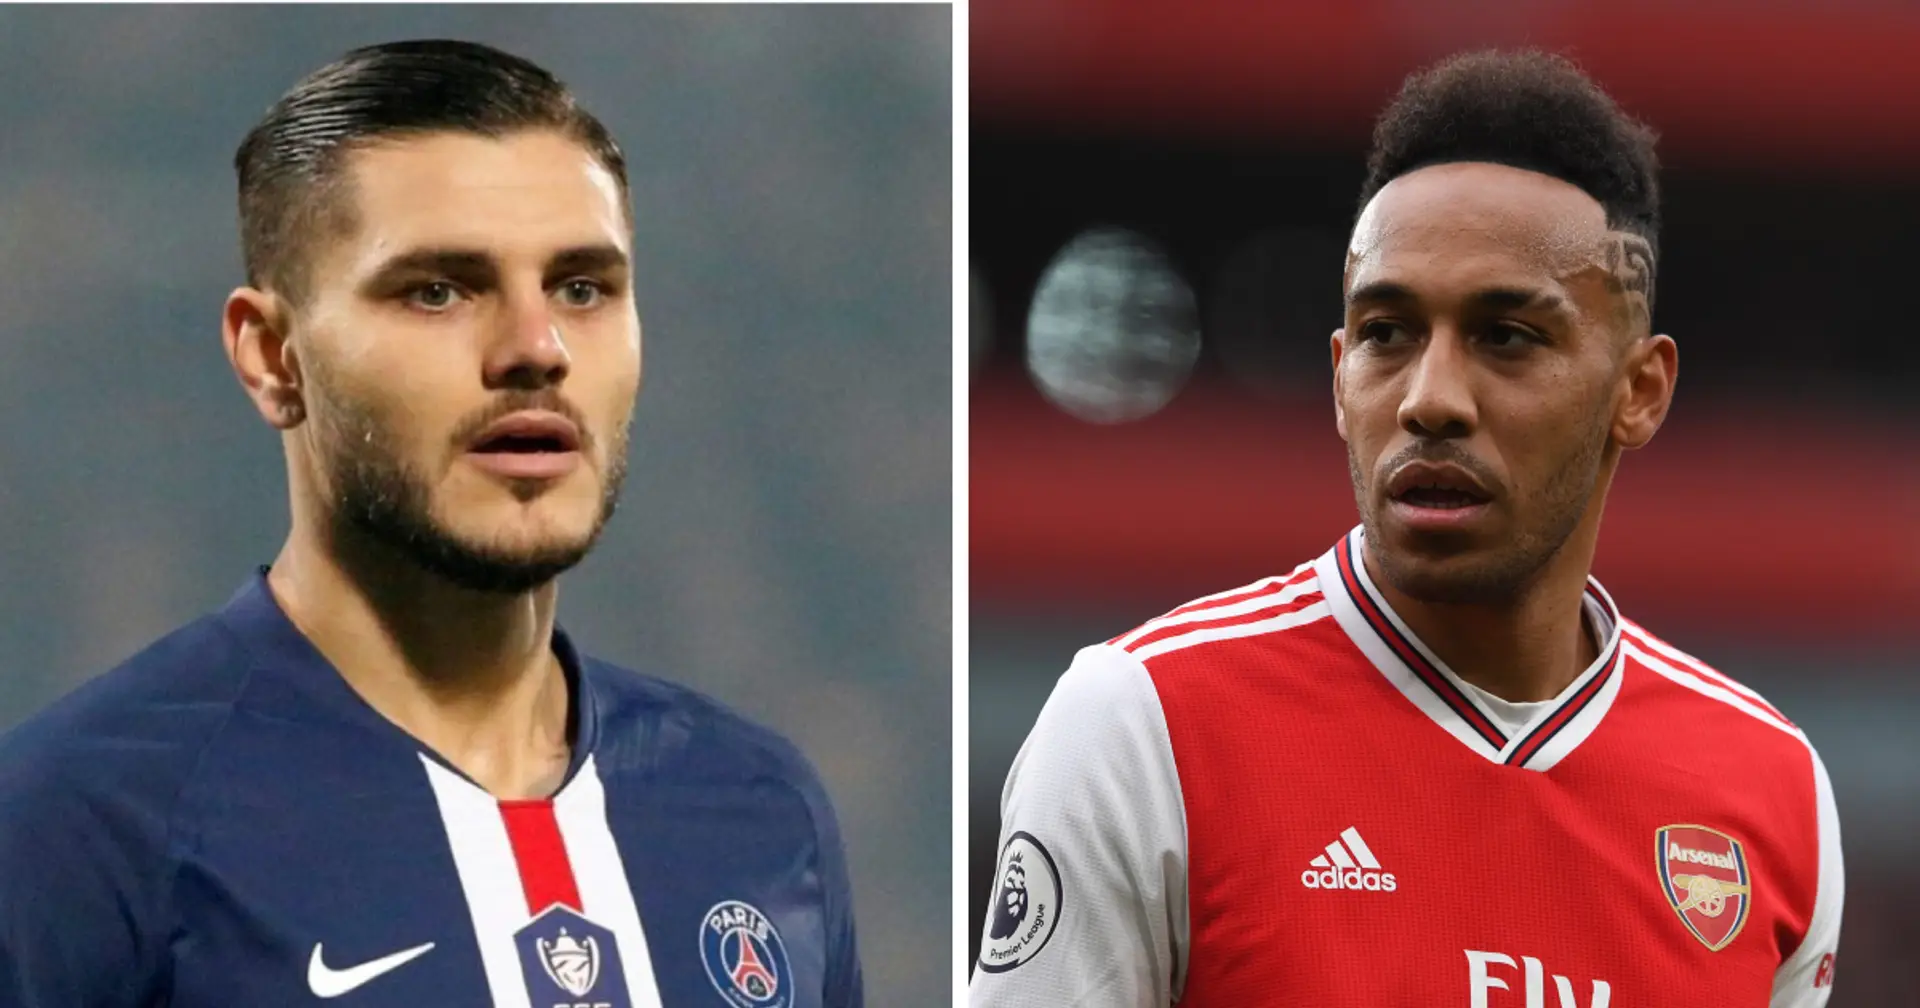 Arsenal could have swapped Auba for Icardi, let him join Barca on free instead